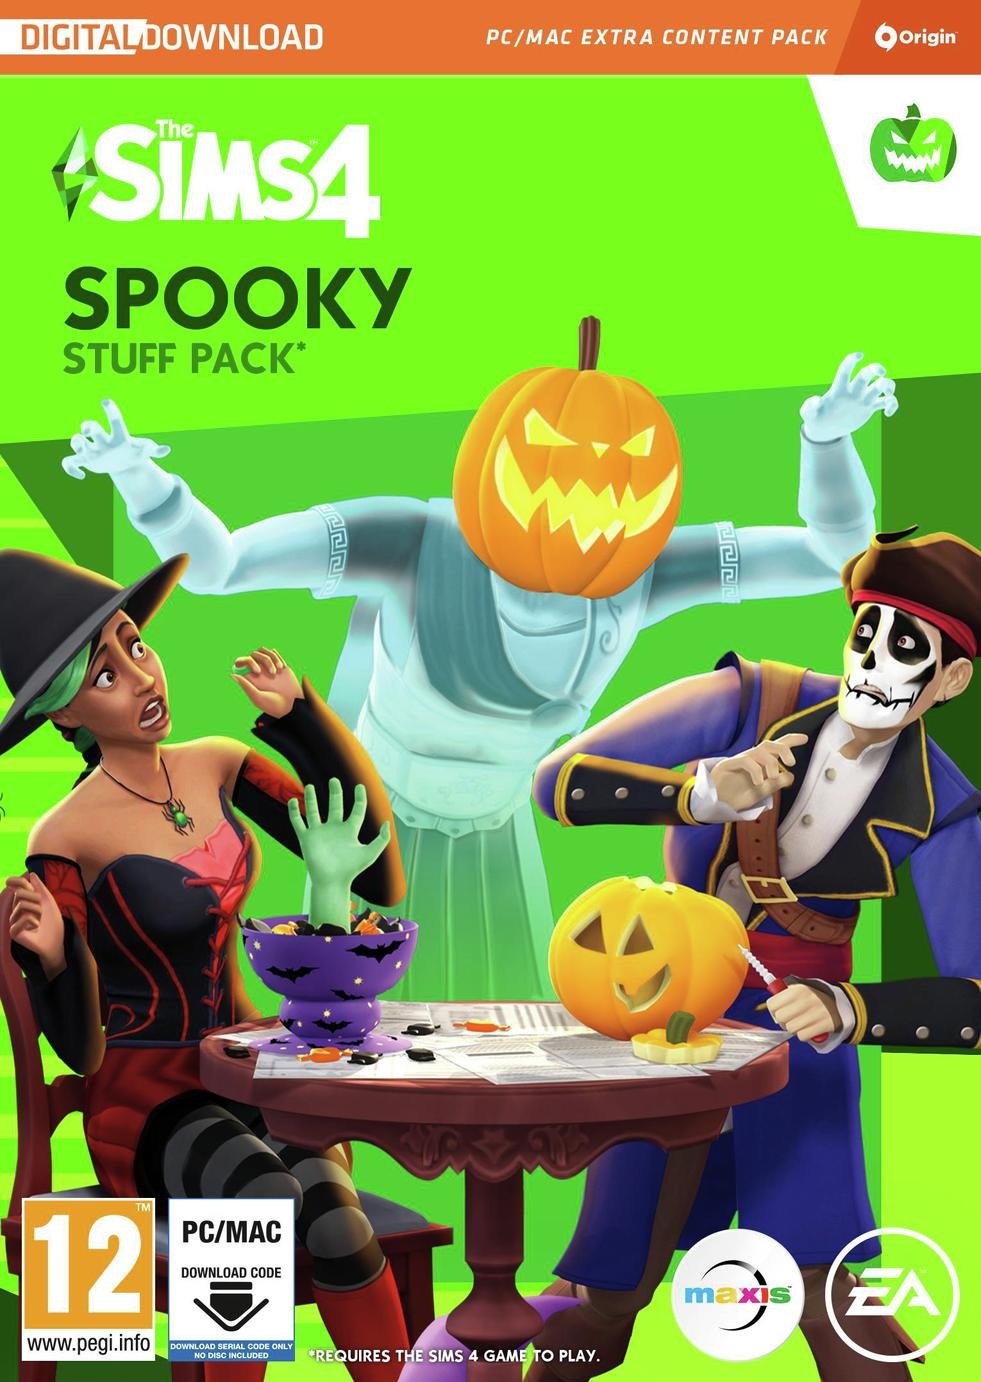 The Sims 4 Spooky Stuff Pack PC Game